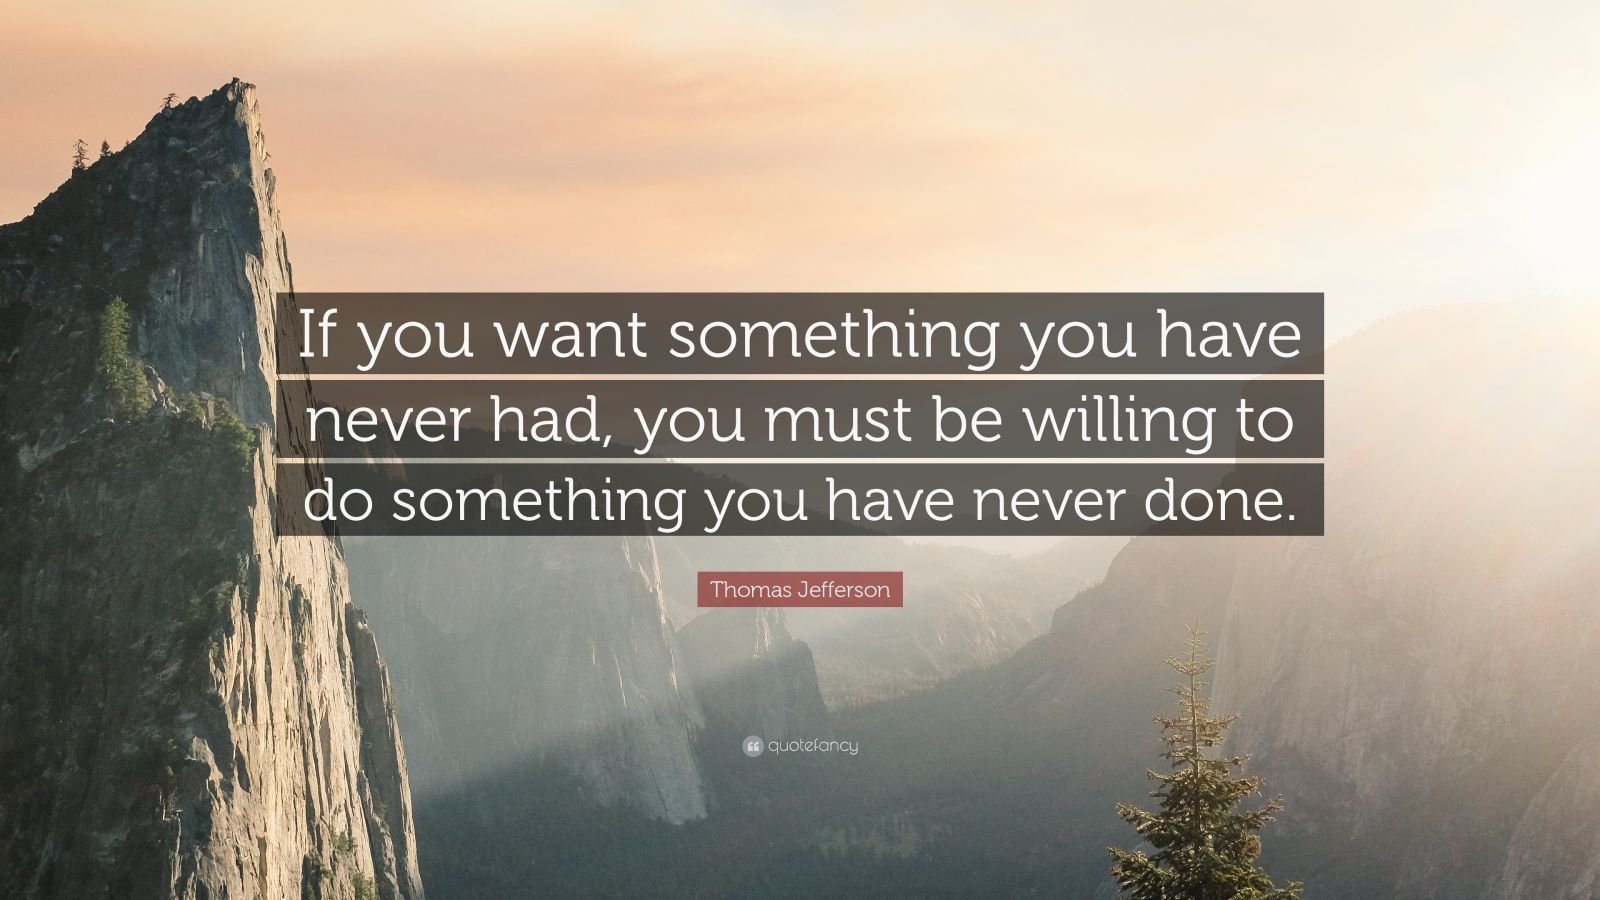 Thomas Jefferson Quote: “If you want something you have never had, you must be willing to do something you have never done.”